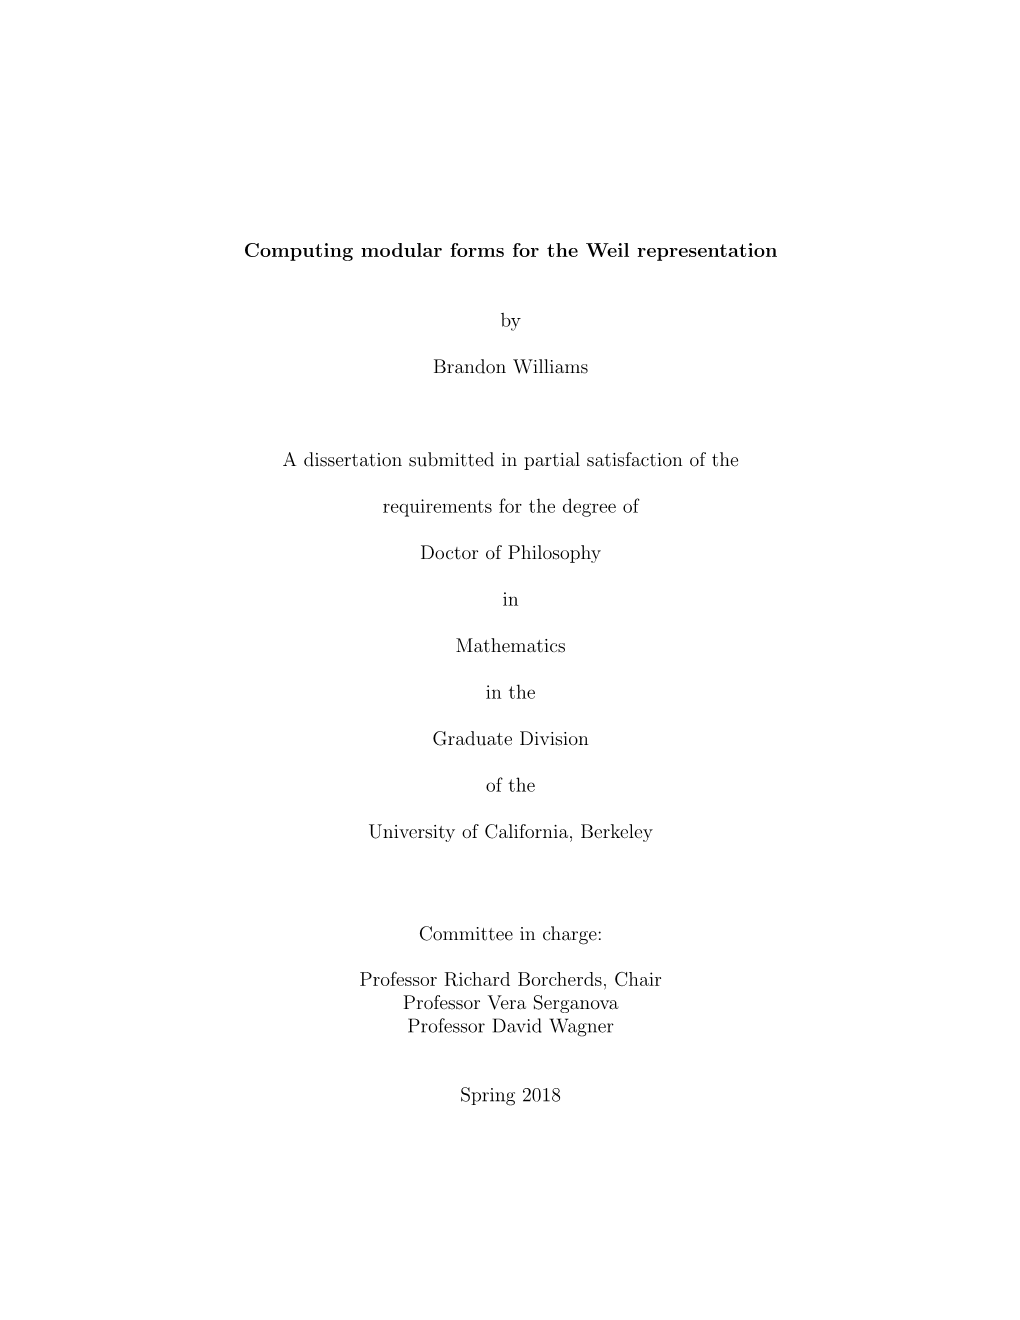 Computing Modular Forms for the Weil Representation By